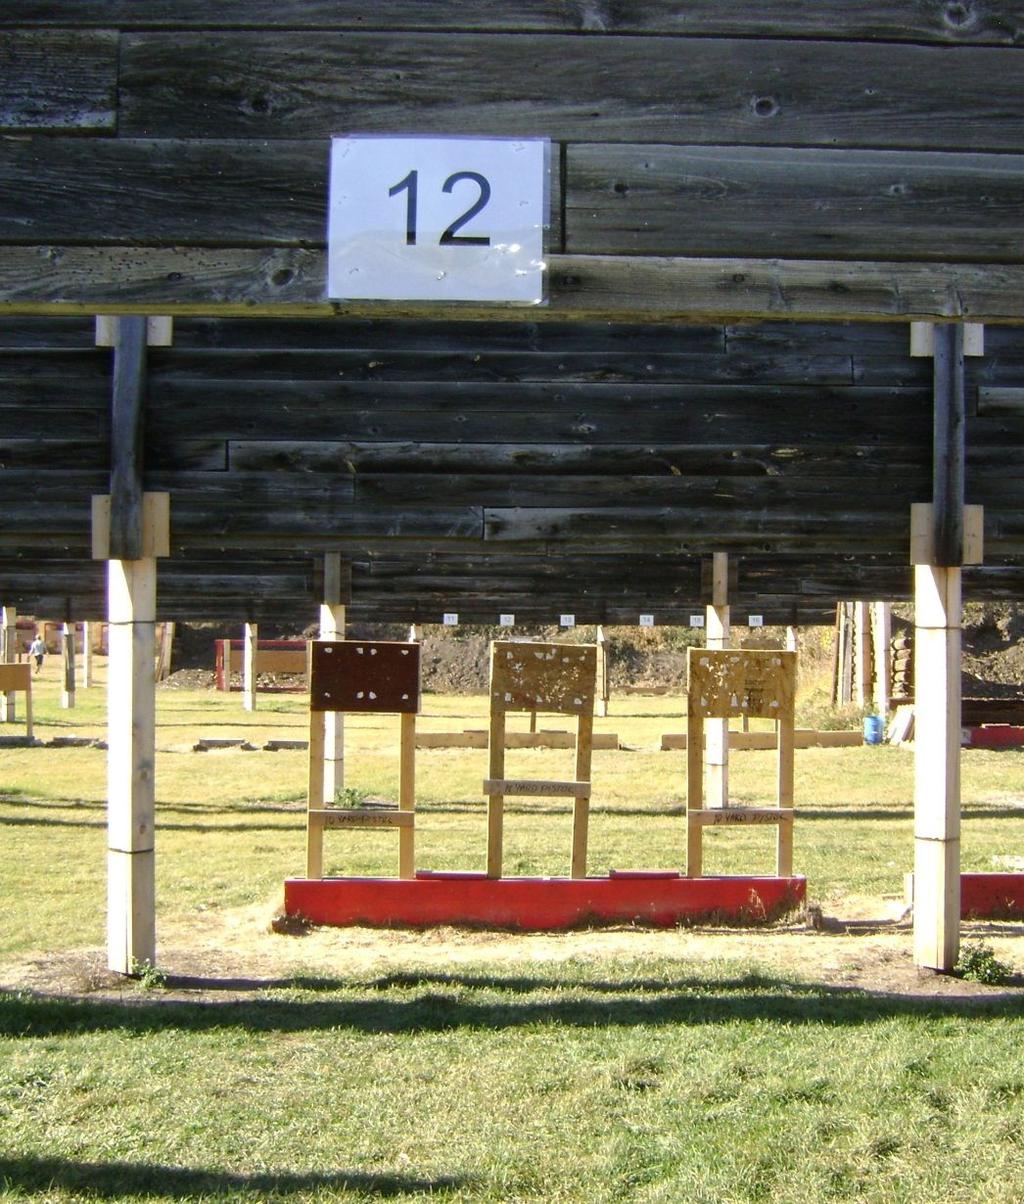 Targets bay 11 to 22 You are shooting in bay 12. Your target is the middle target.